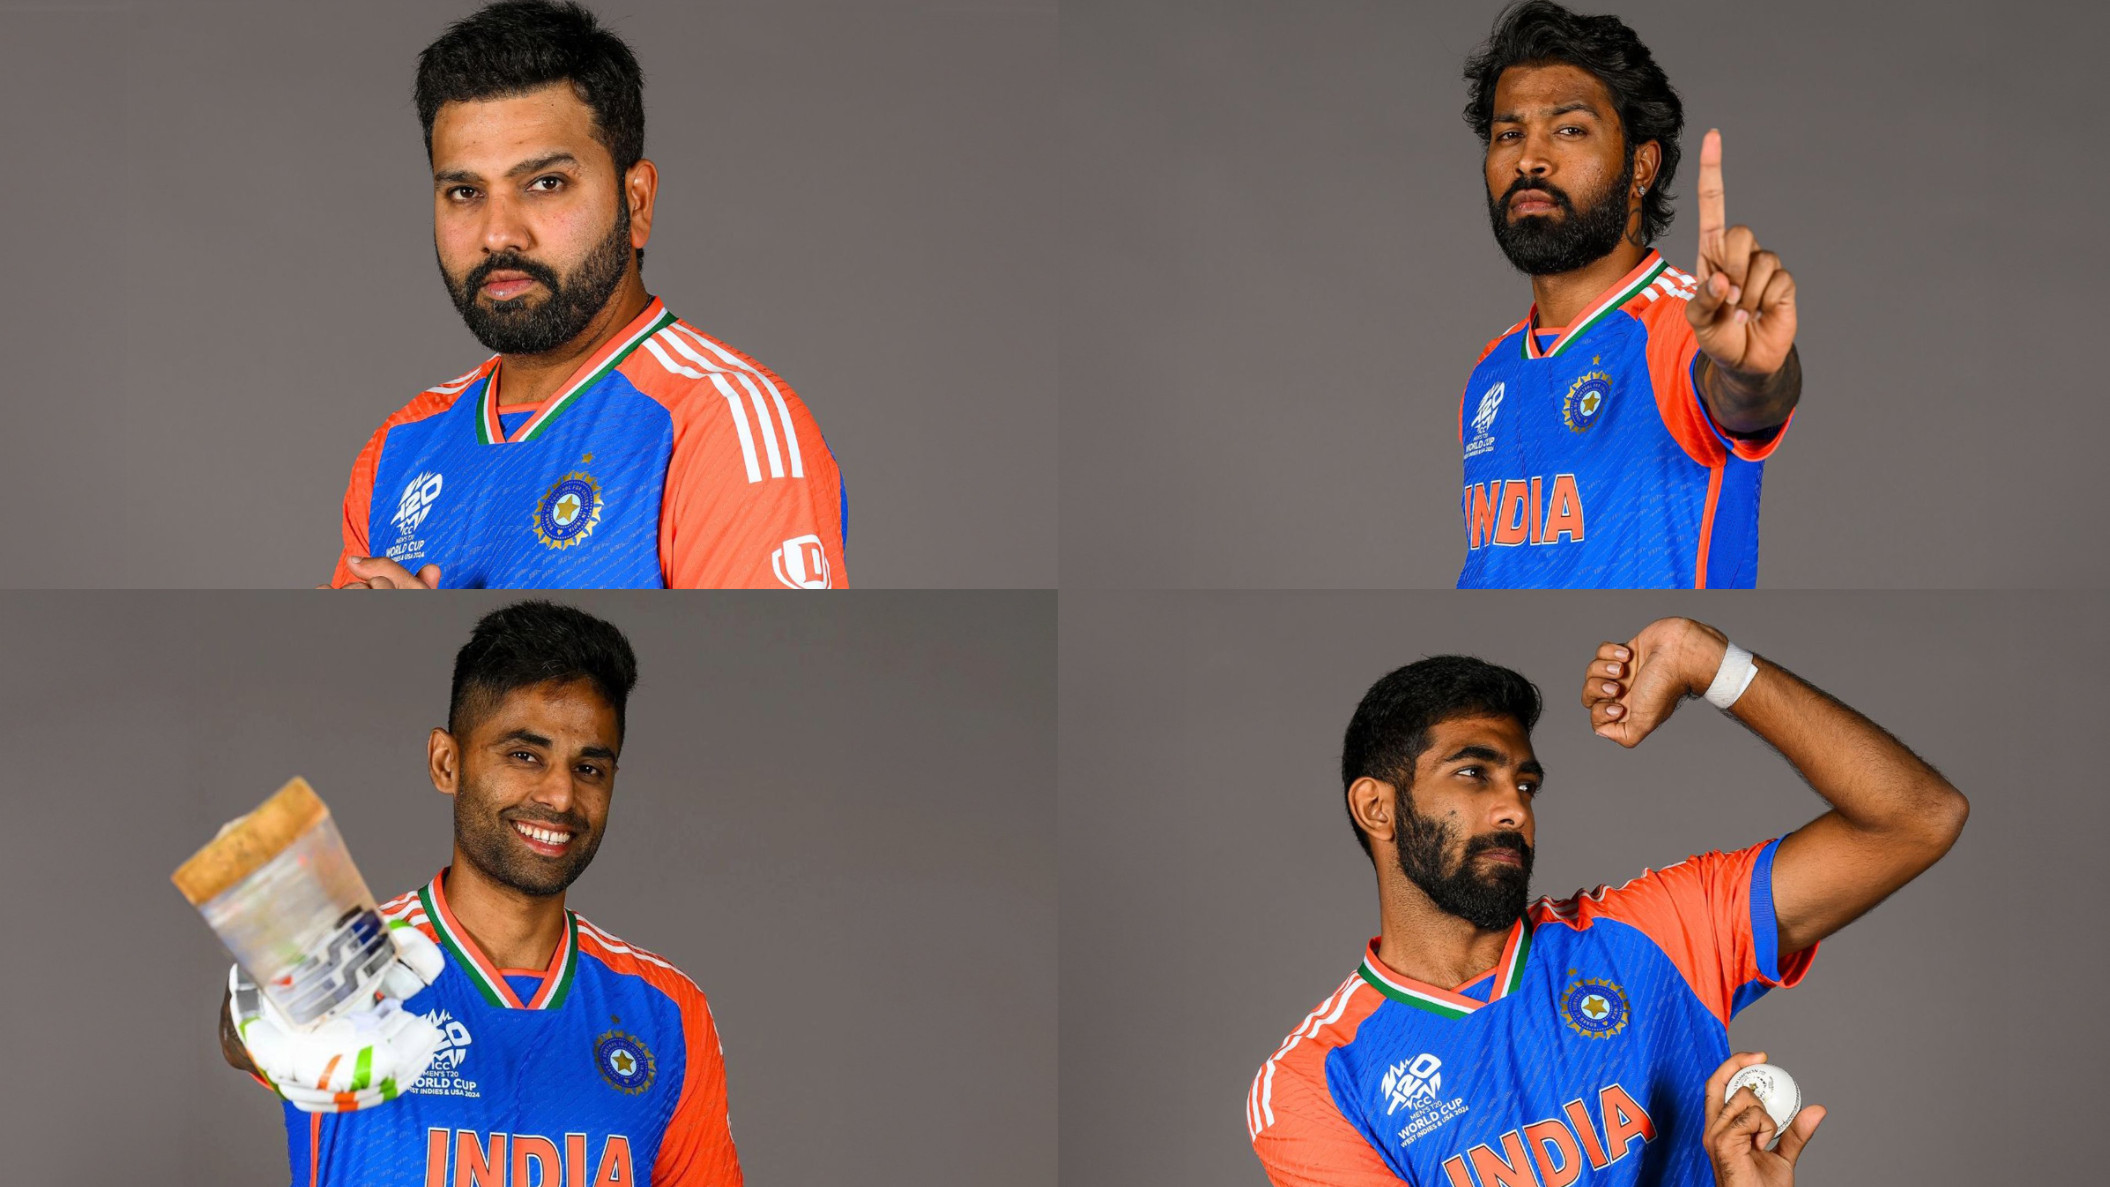 Fans react to KKR’s “United in blue for India” post featuring MI's Rohit, Bumrah, Hardik and Suryakumar’s photos